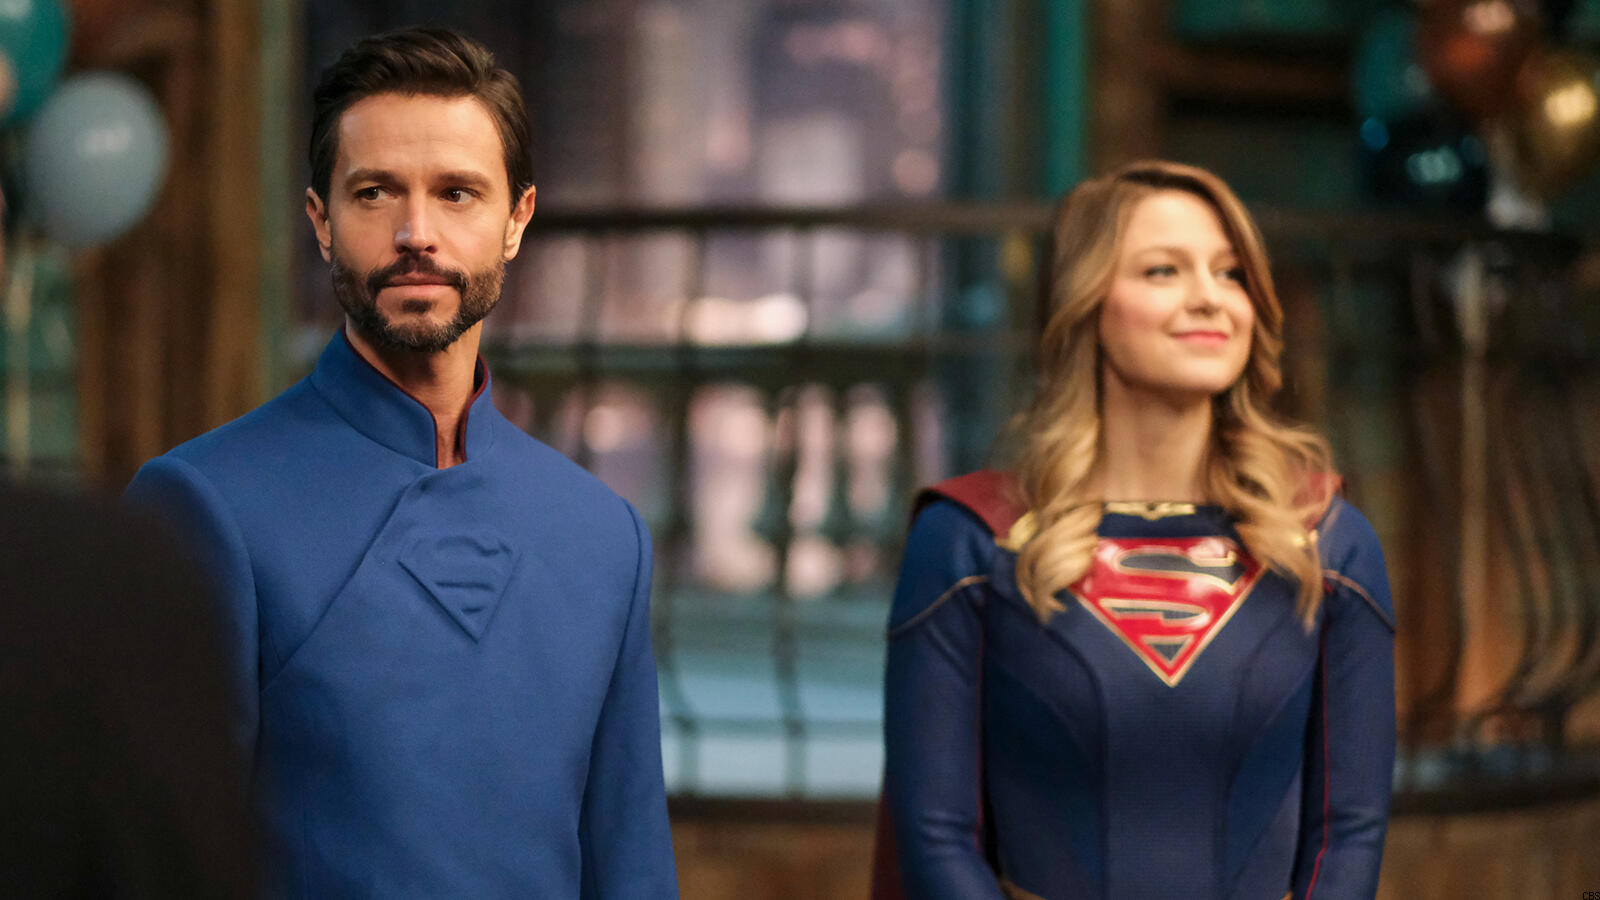 Here's How Supergirl's Jason Behr Envisions A Zor El Cameo On Superman & Lois